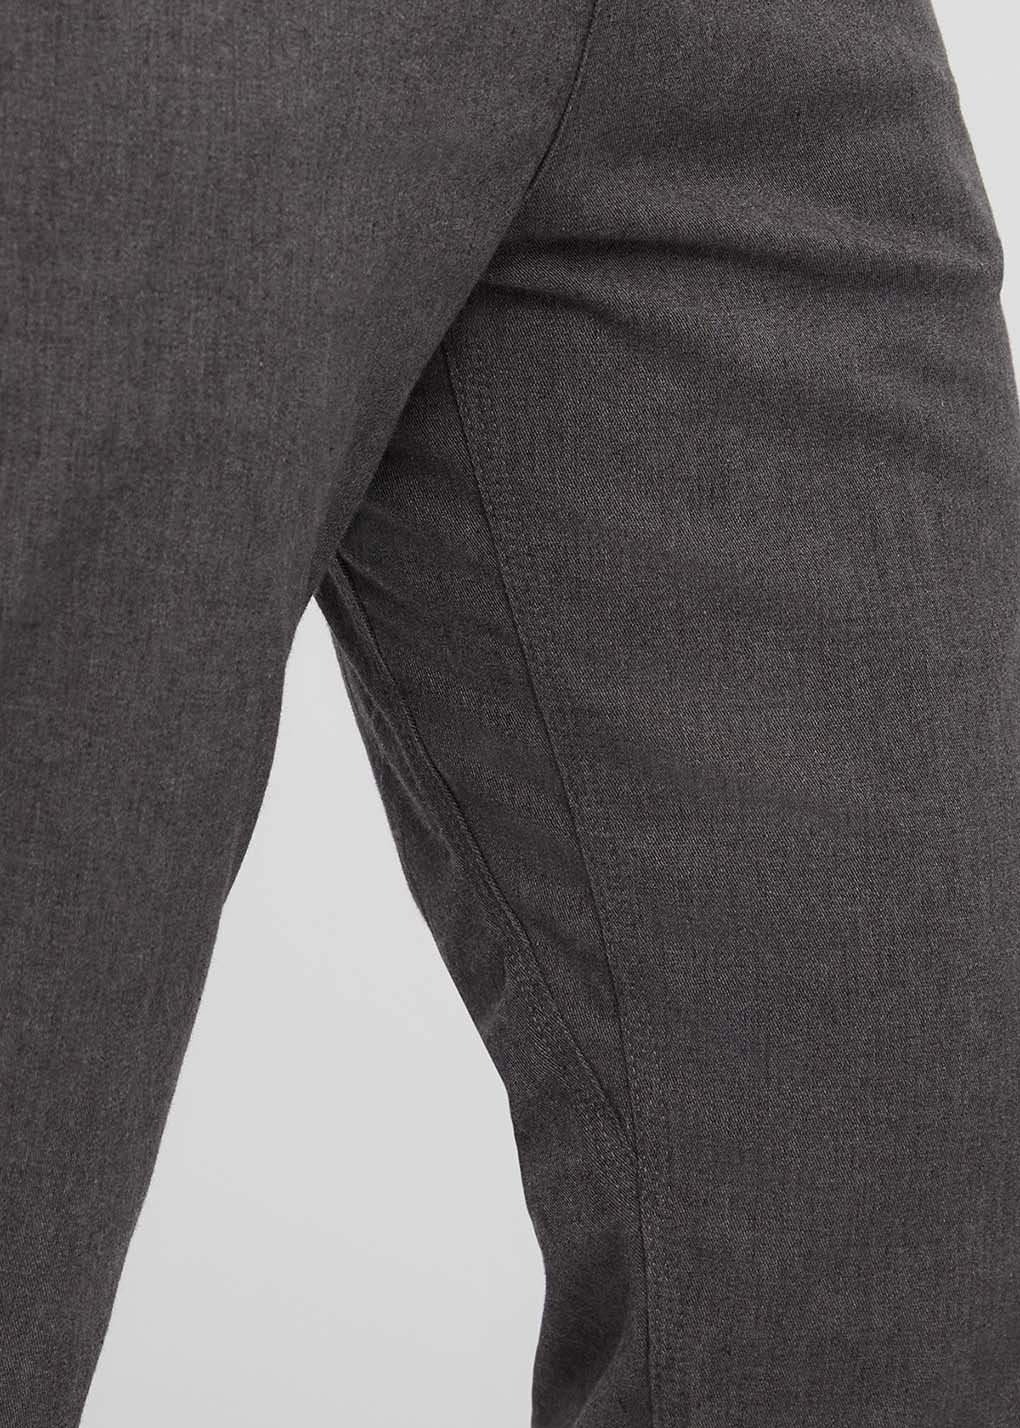 mens stretch heather grey chino pants gusset detail